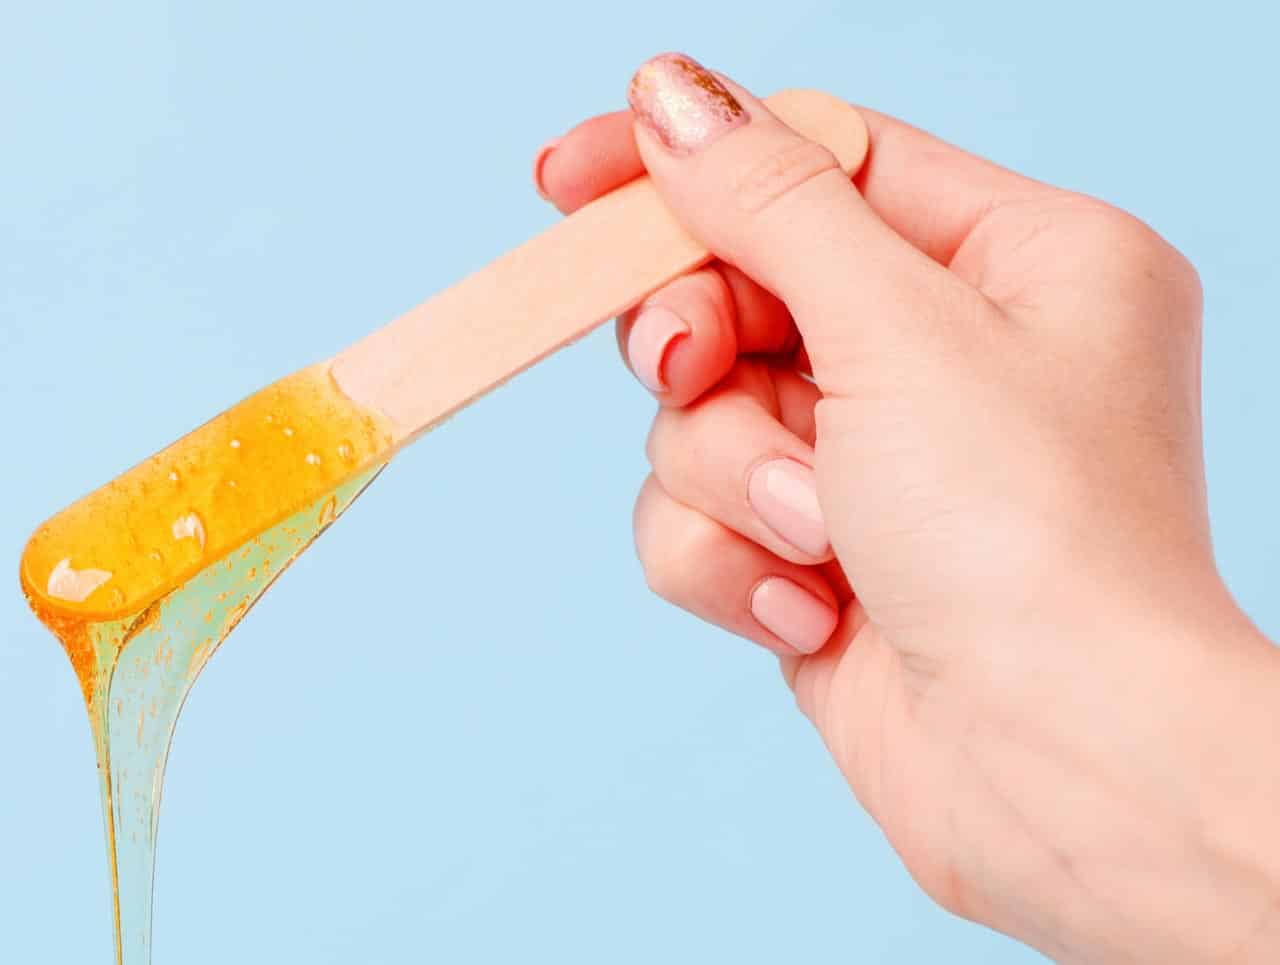 6 Steps To Ease You Into Your First Waxing Session